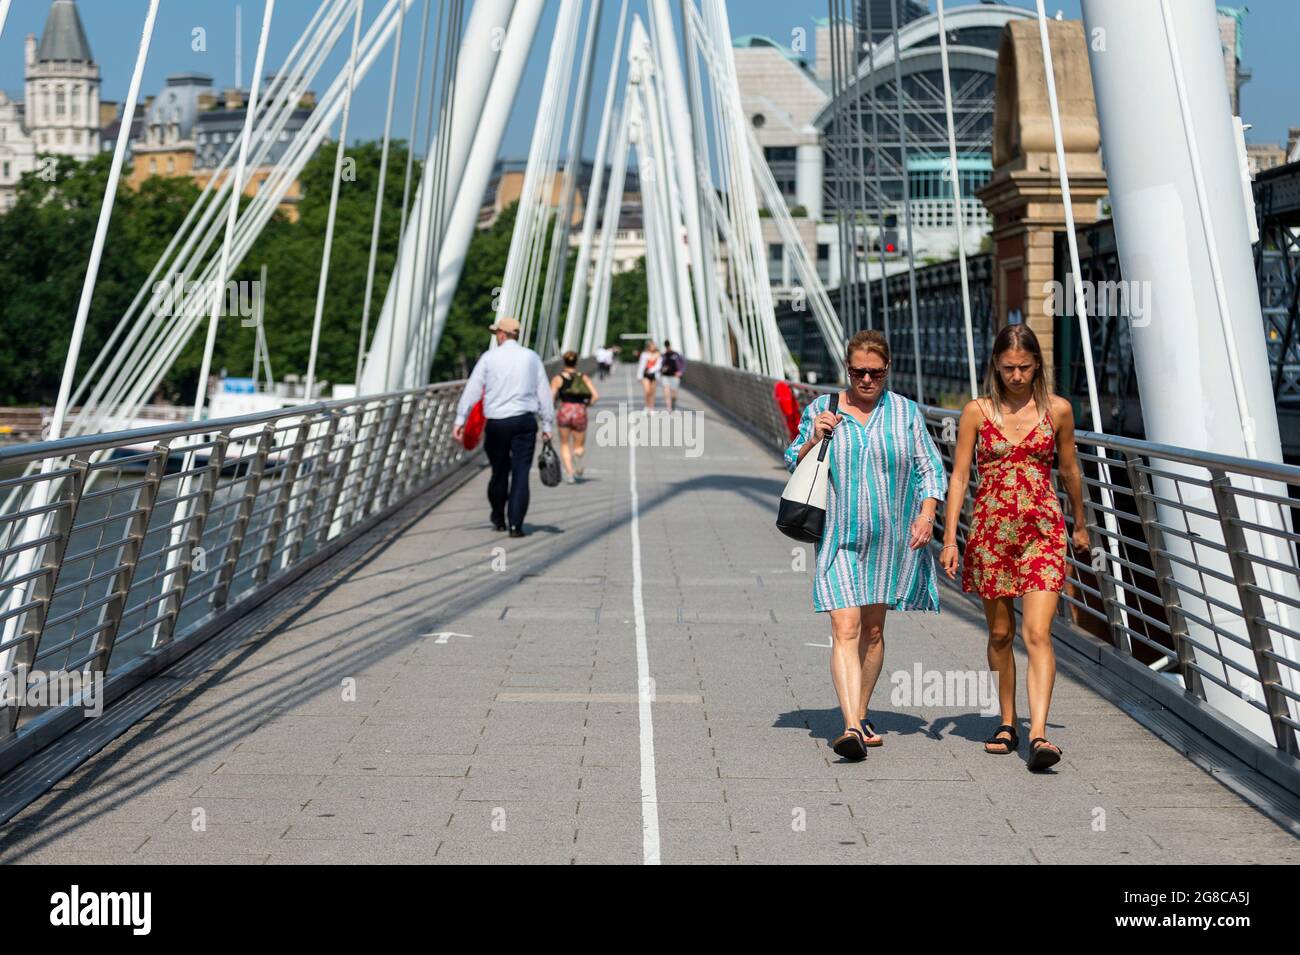 London, UK.  19 July 2021. People cross the Jubilee Bridge, adhering to social distancing lane markings on what has been dubbed “Freedom Day”, when the UK government has eased remaining coronavirus lockdown restrictions.  This comes against a backdrop of a rising number of daily positive cases, large numbers being required to self-isolate after being notified by the NHS app on their smartphones, including Boris Johnson, Prime Minister, Rishi Sunak, Chancellor, and Sajiv Javid, Health Secretary.  Credit: Stephen Chung / Alamy Live News Stock Photo